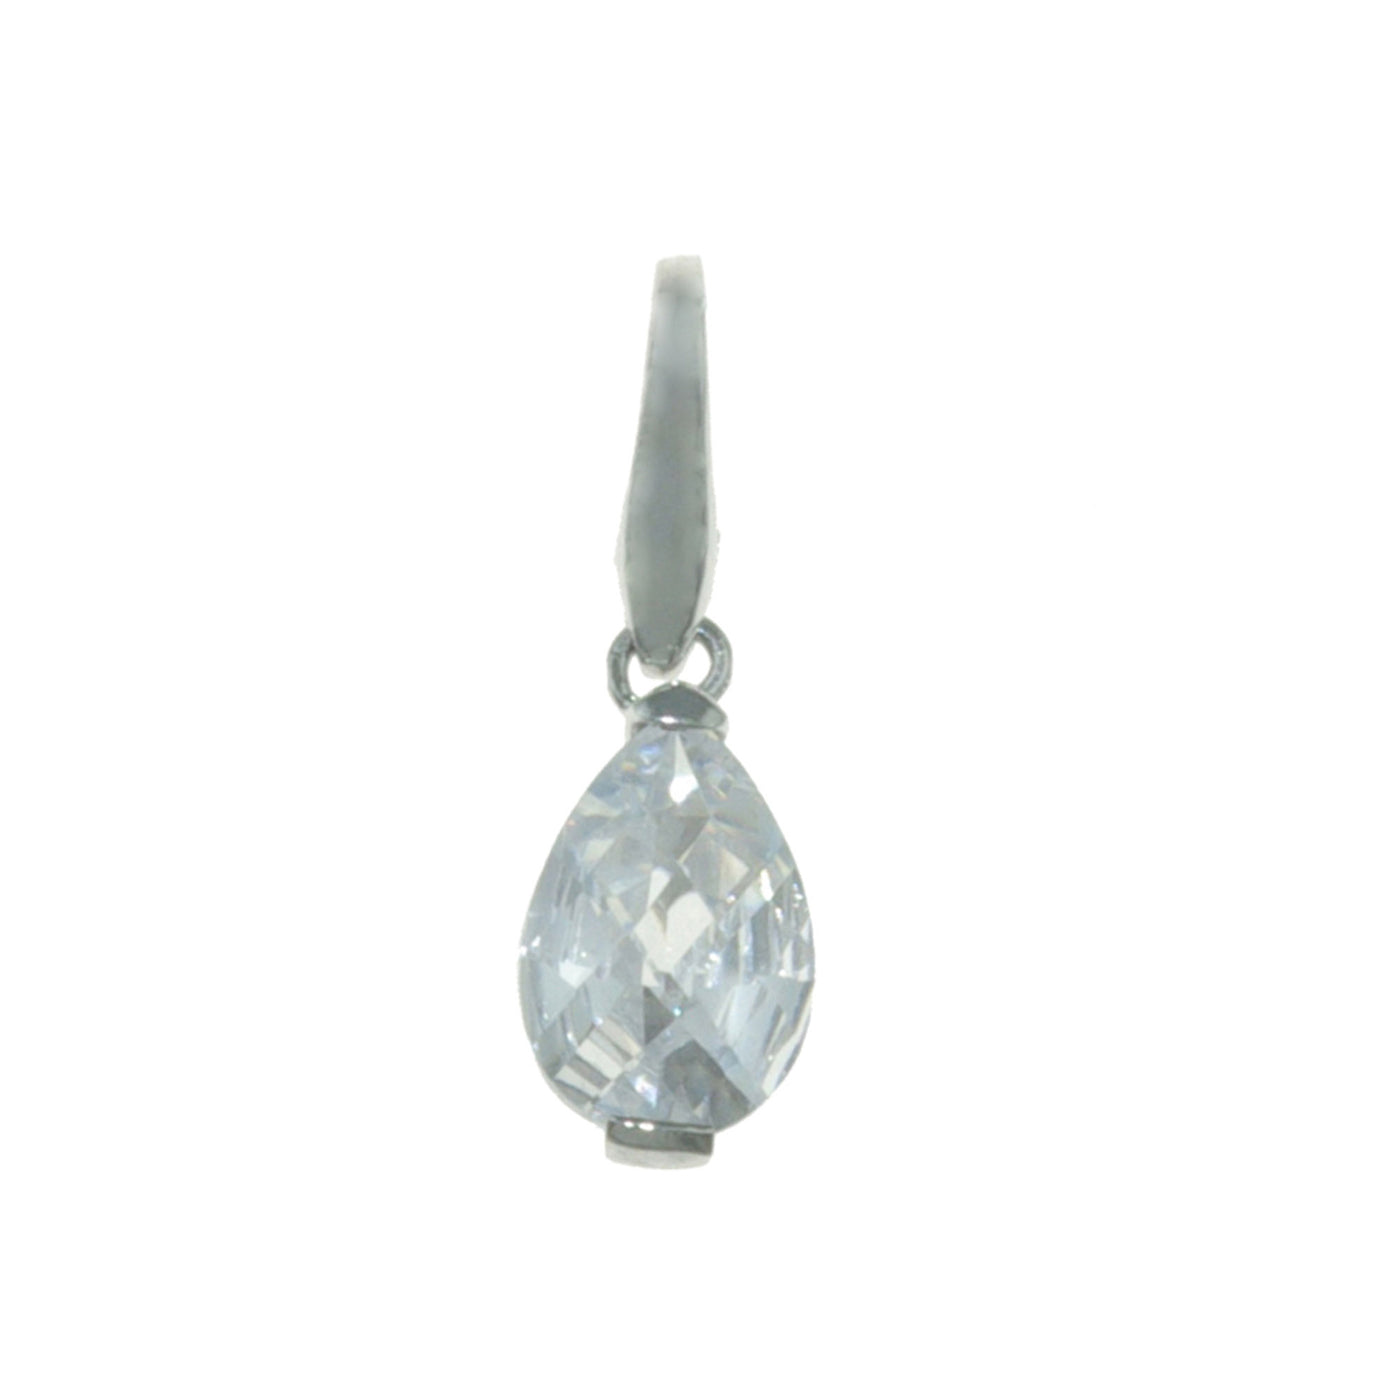 Rebecca Sloane Sterling Silver Faceted Cz Pear Shape Stone Charm